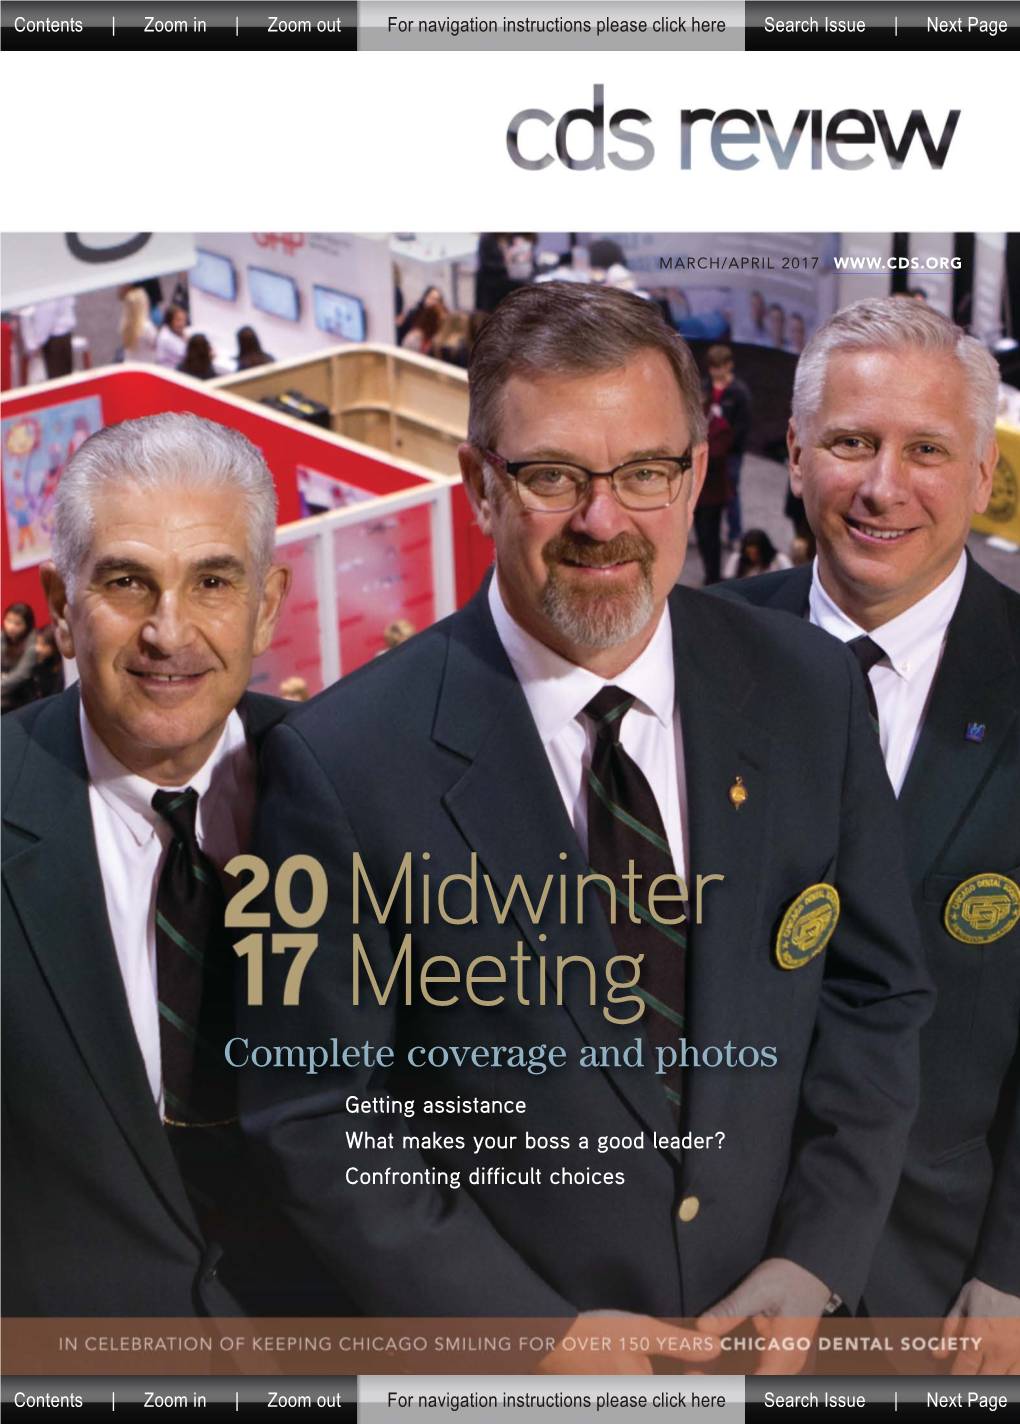 Midwinter Meeting Complete Coverage and Photos Getting Assistance What Makes Your Boss a Good Leader? Confronting Difficult Choices